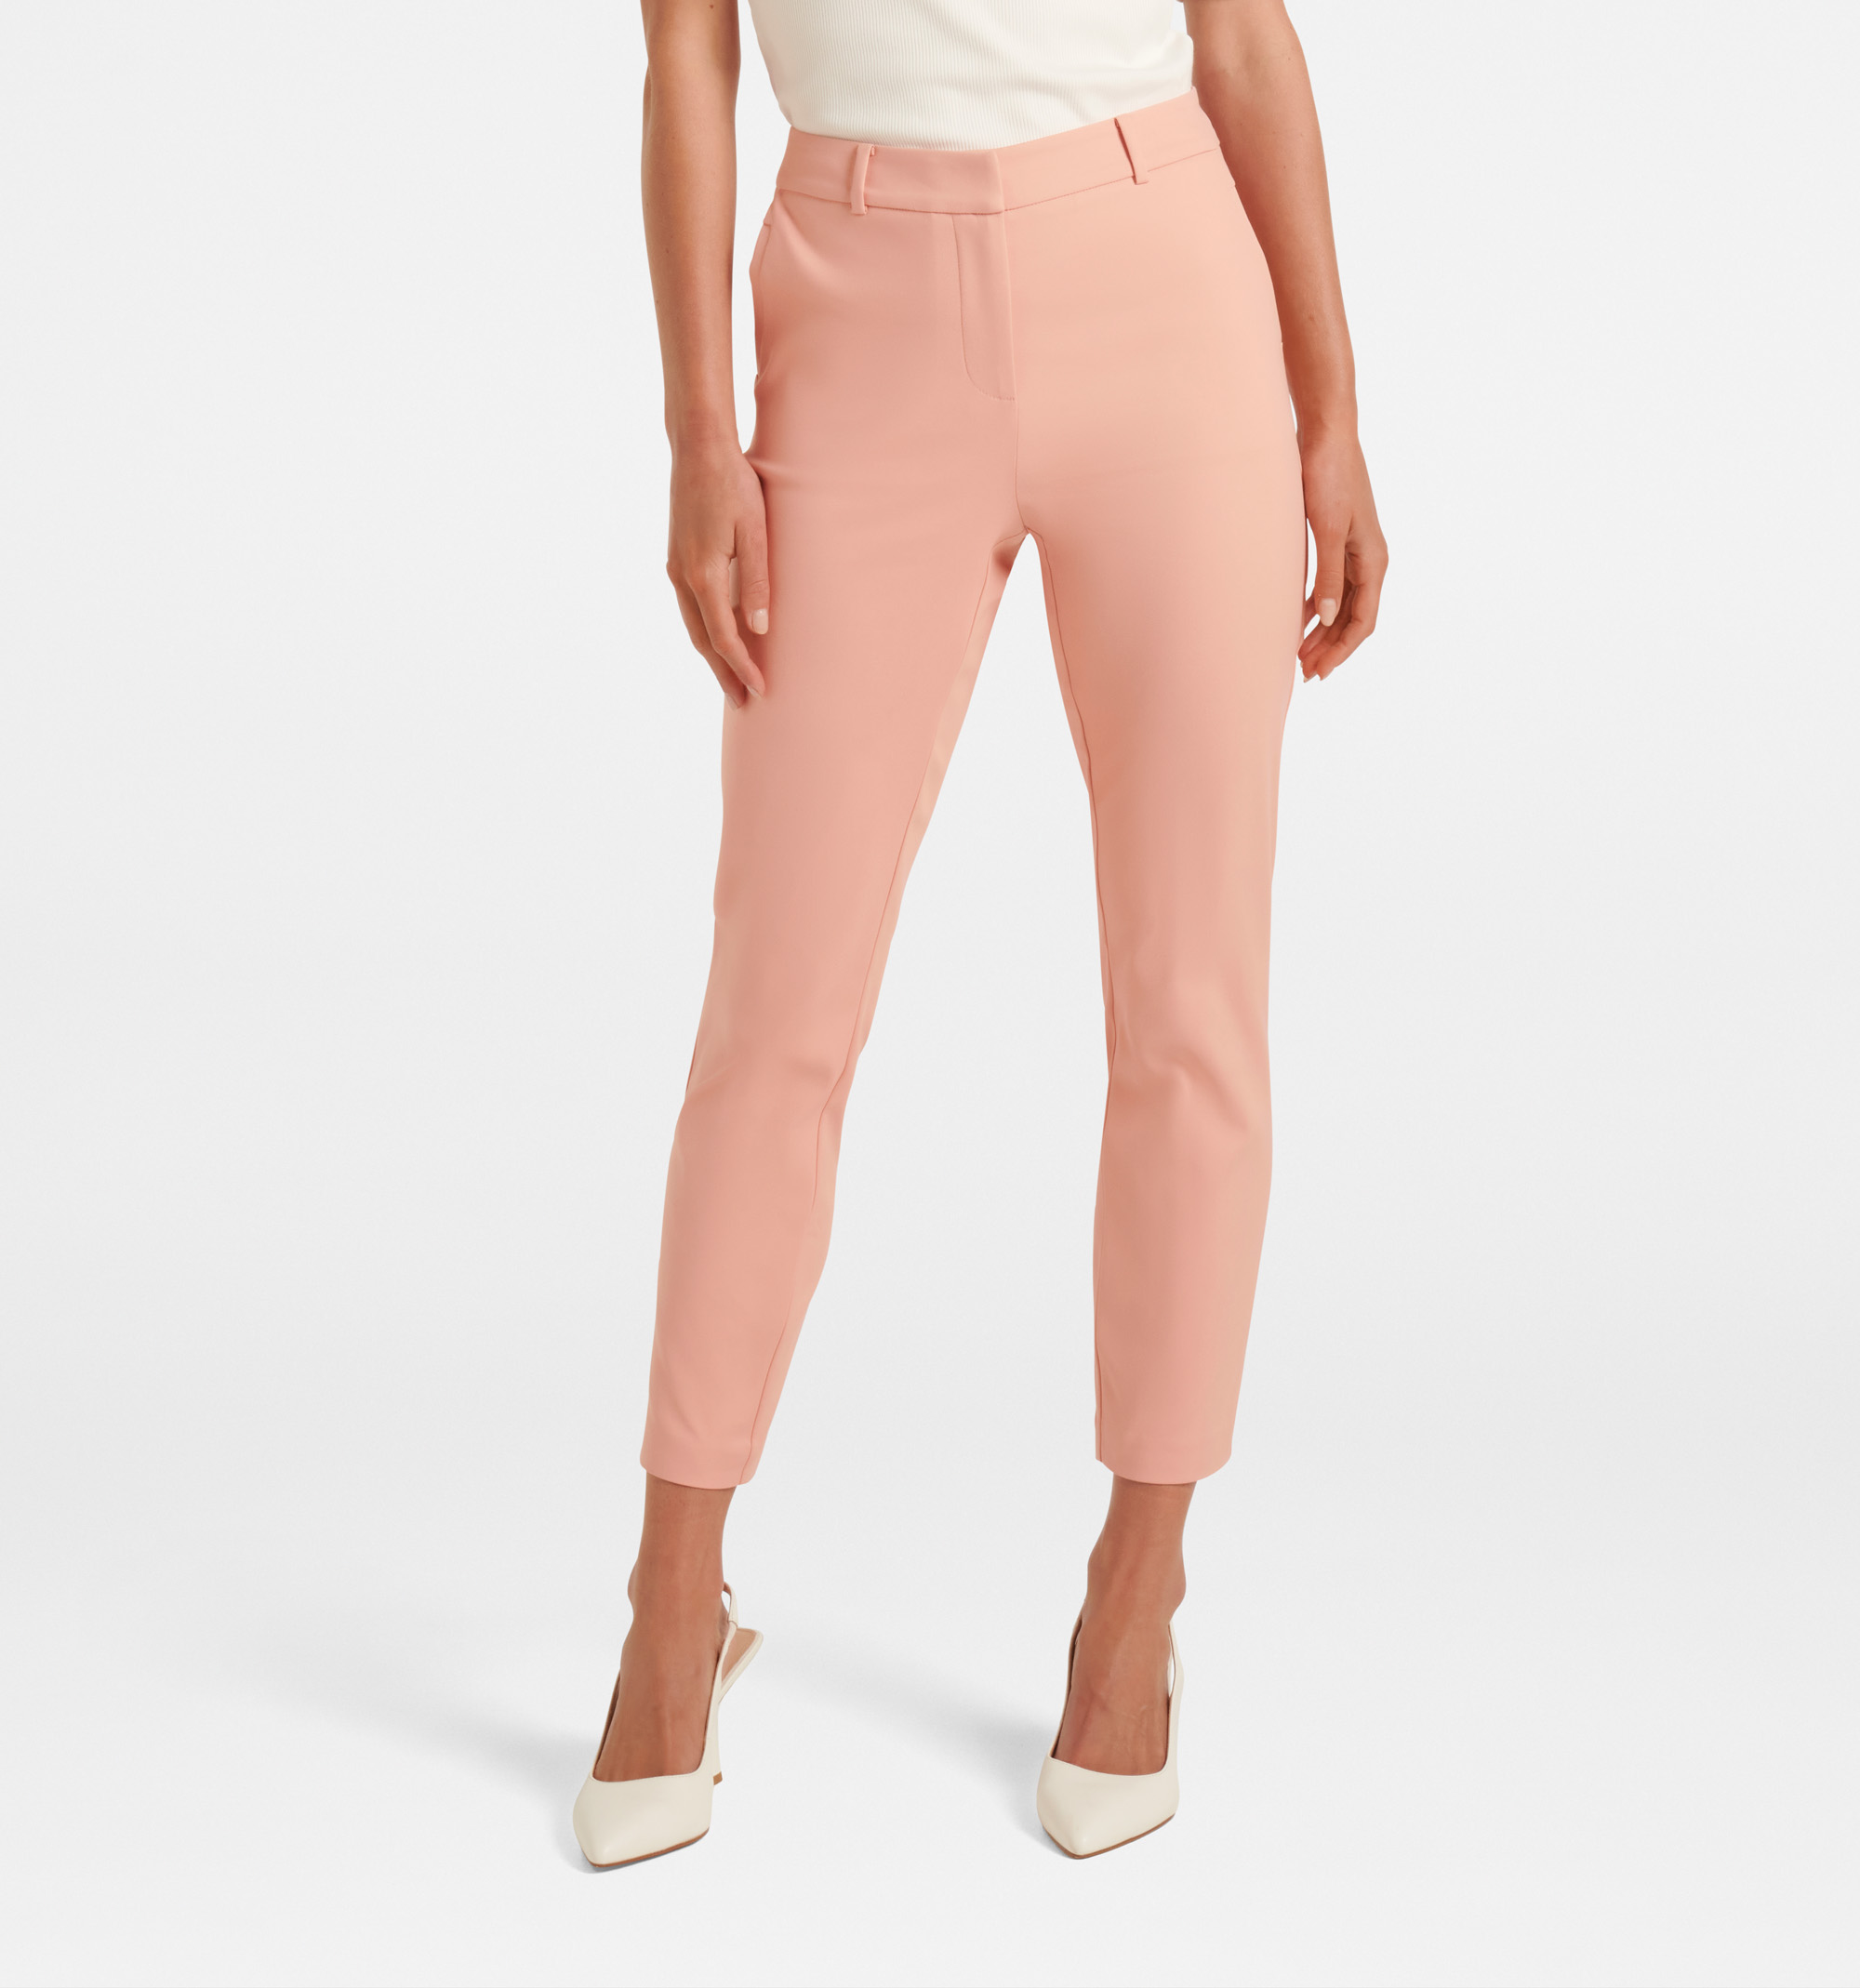 Buy Pink Cotton Grace 7/8th Slim Pants - Forever New